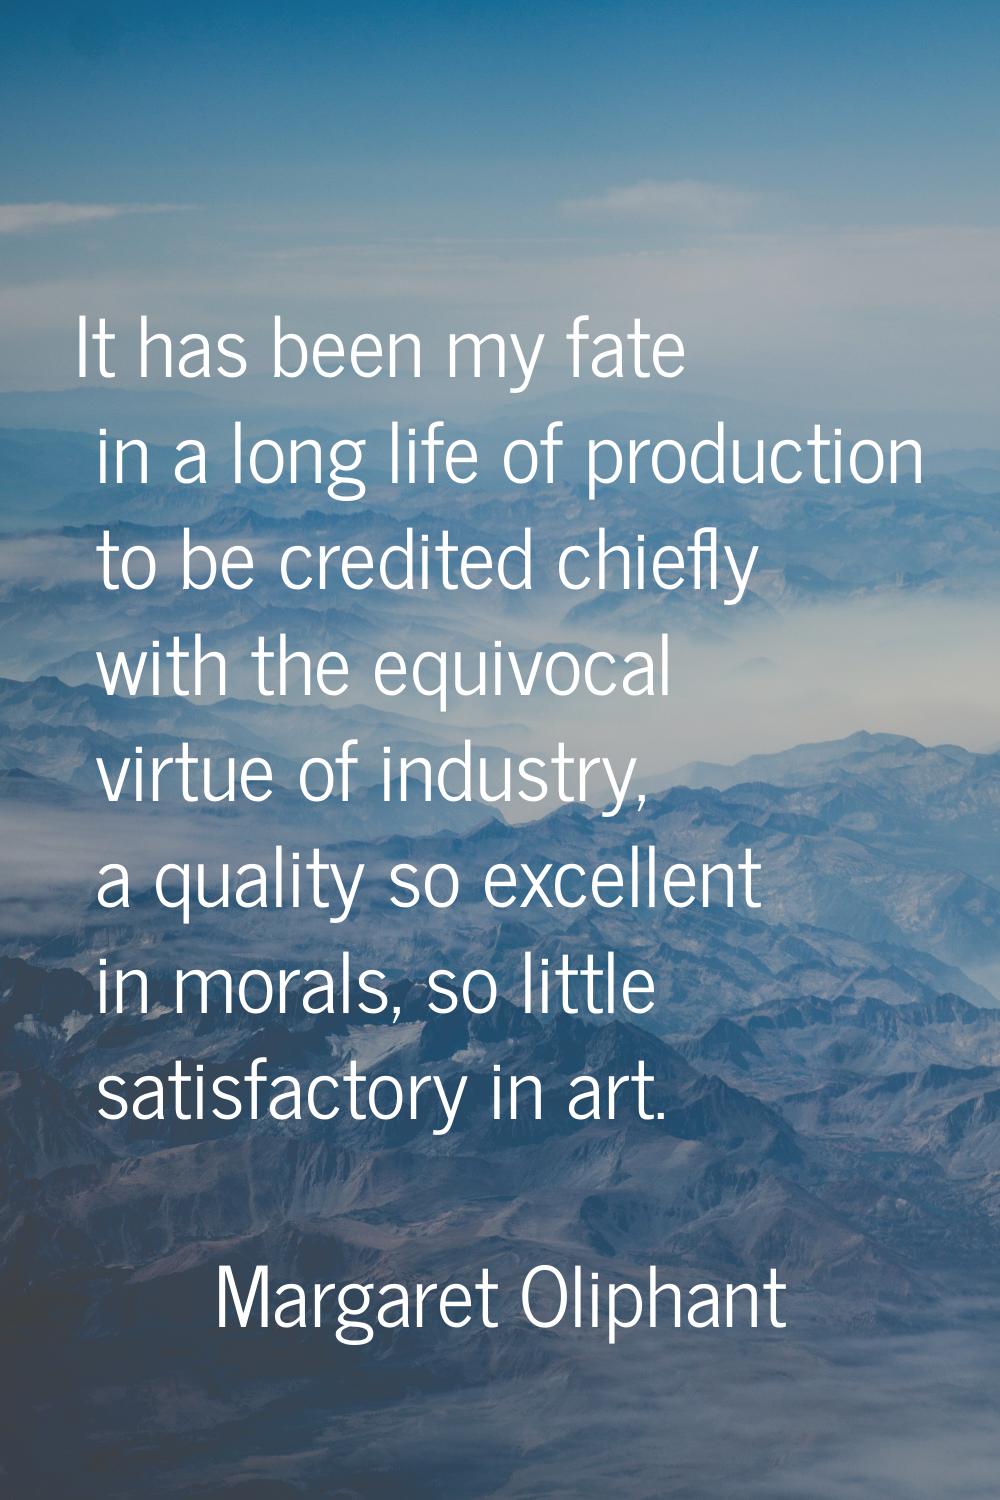 It has been my fate in a long life of production to be credited chiefly with the equivocal virtue o